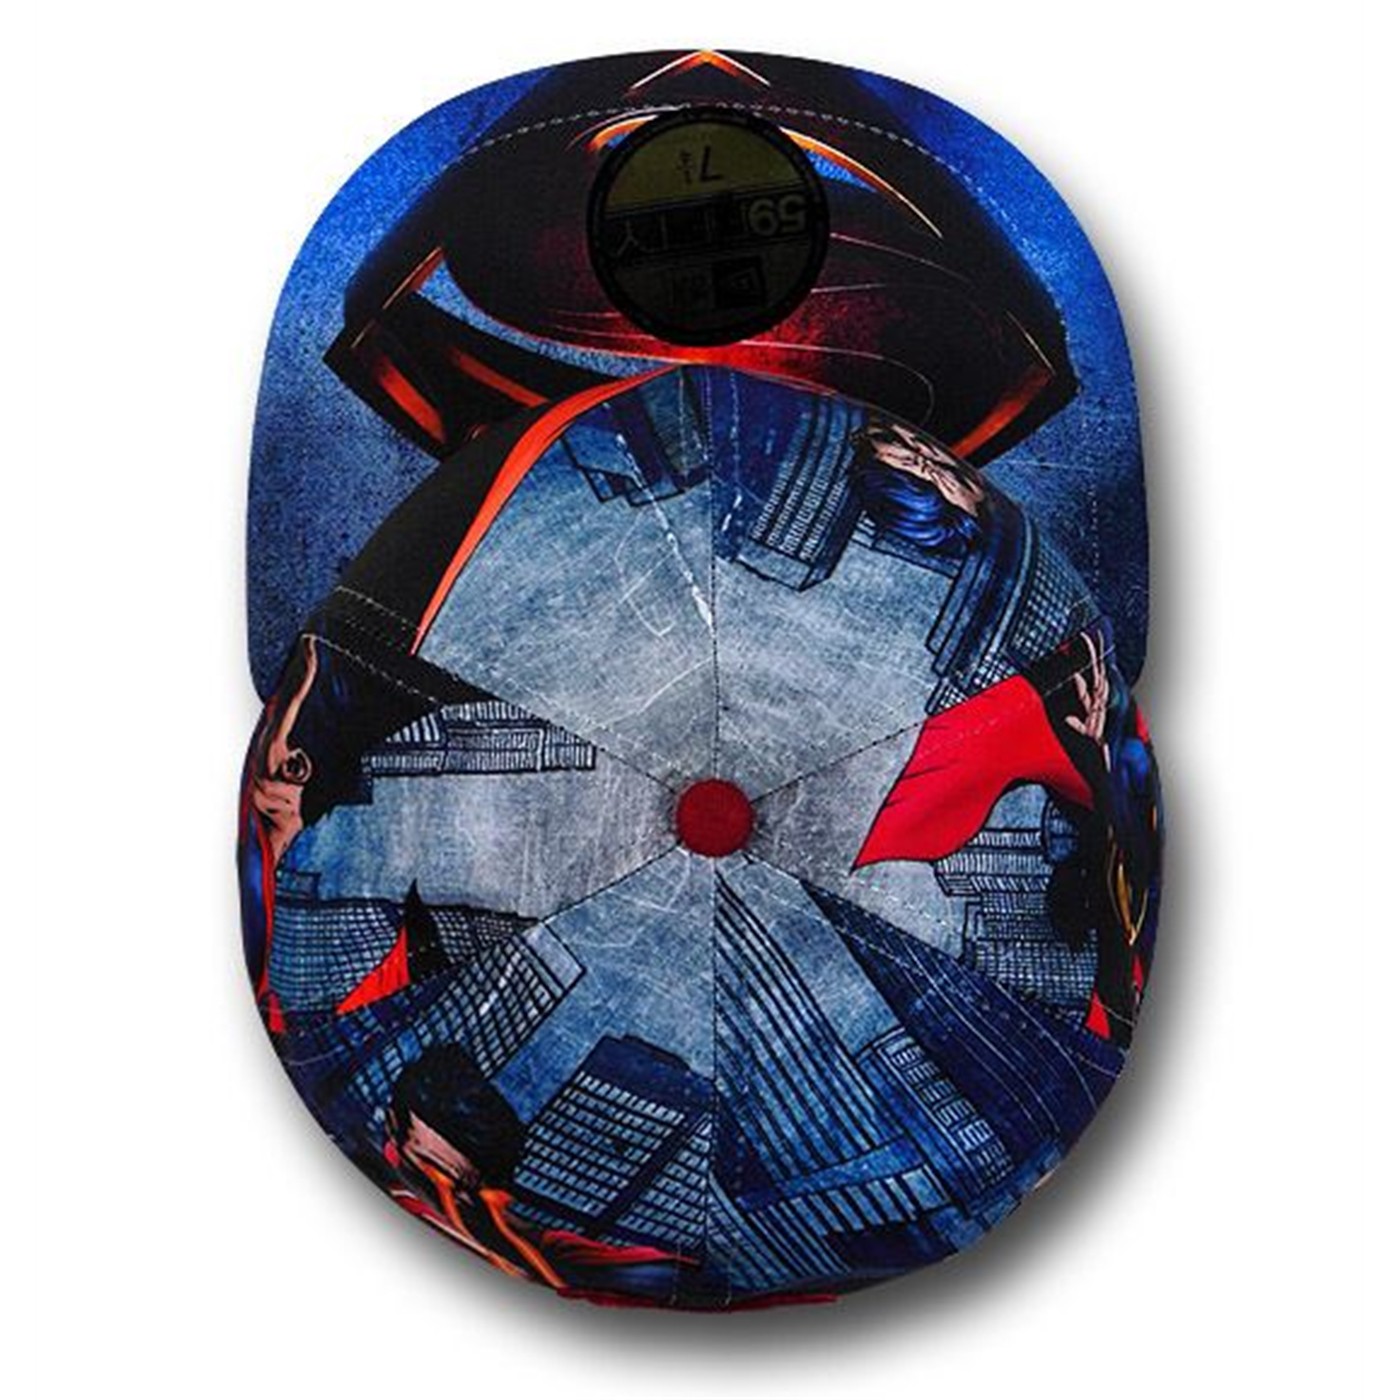 Superman Man Of Steel All-Over Print 59Fifty Cap